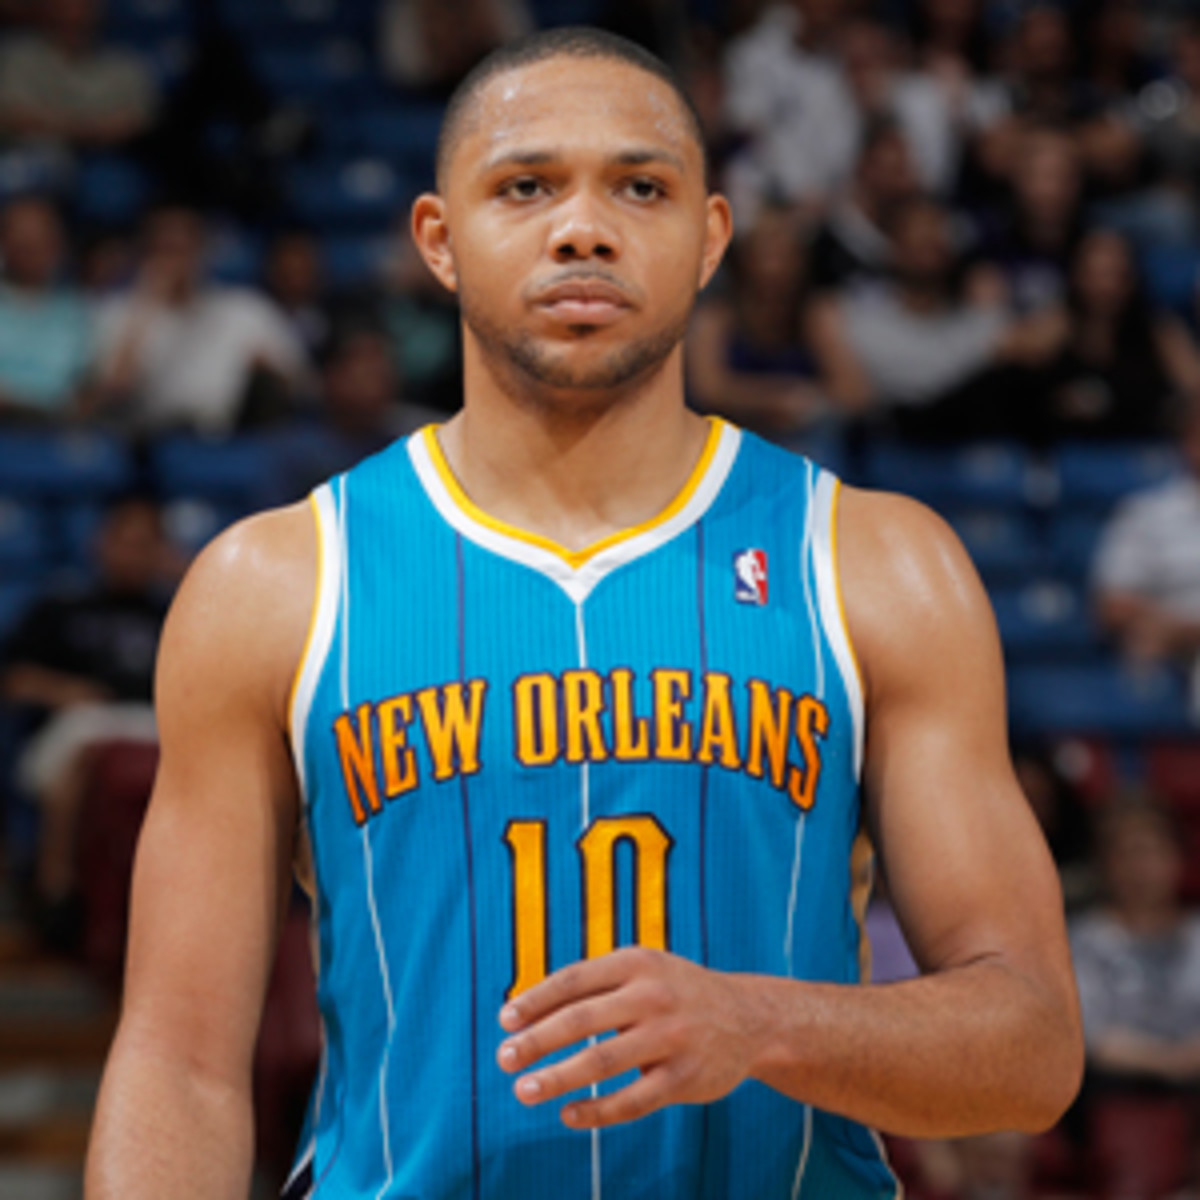 Pelicans scoring leader Eric Gordon has been linked to trade rumors. (Rocky Widner/NBAE via Getty Images)